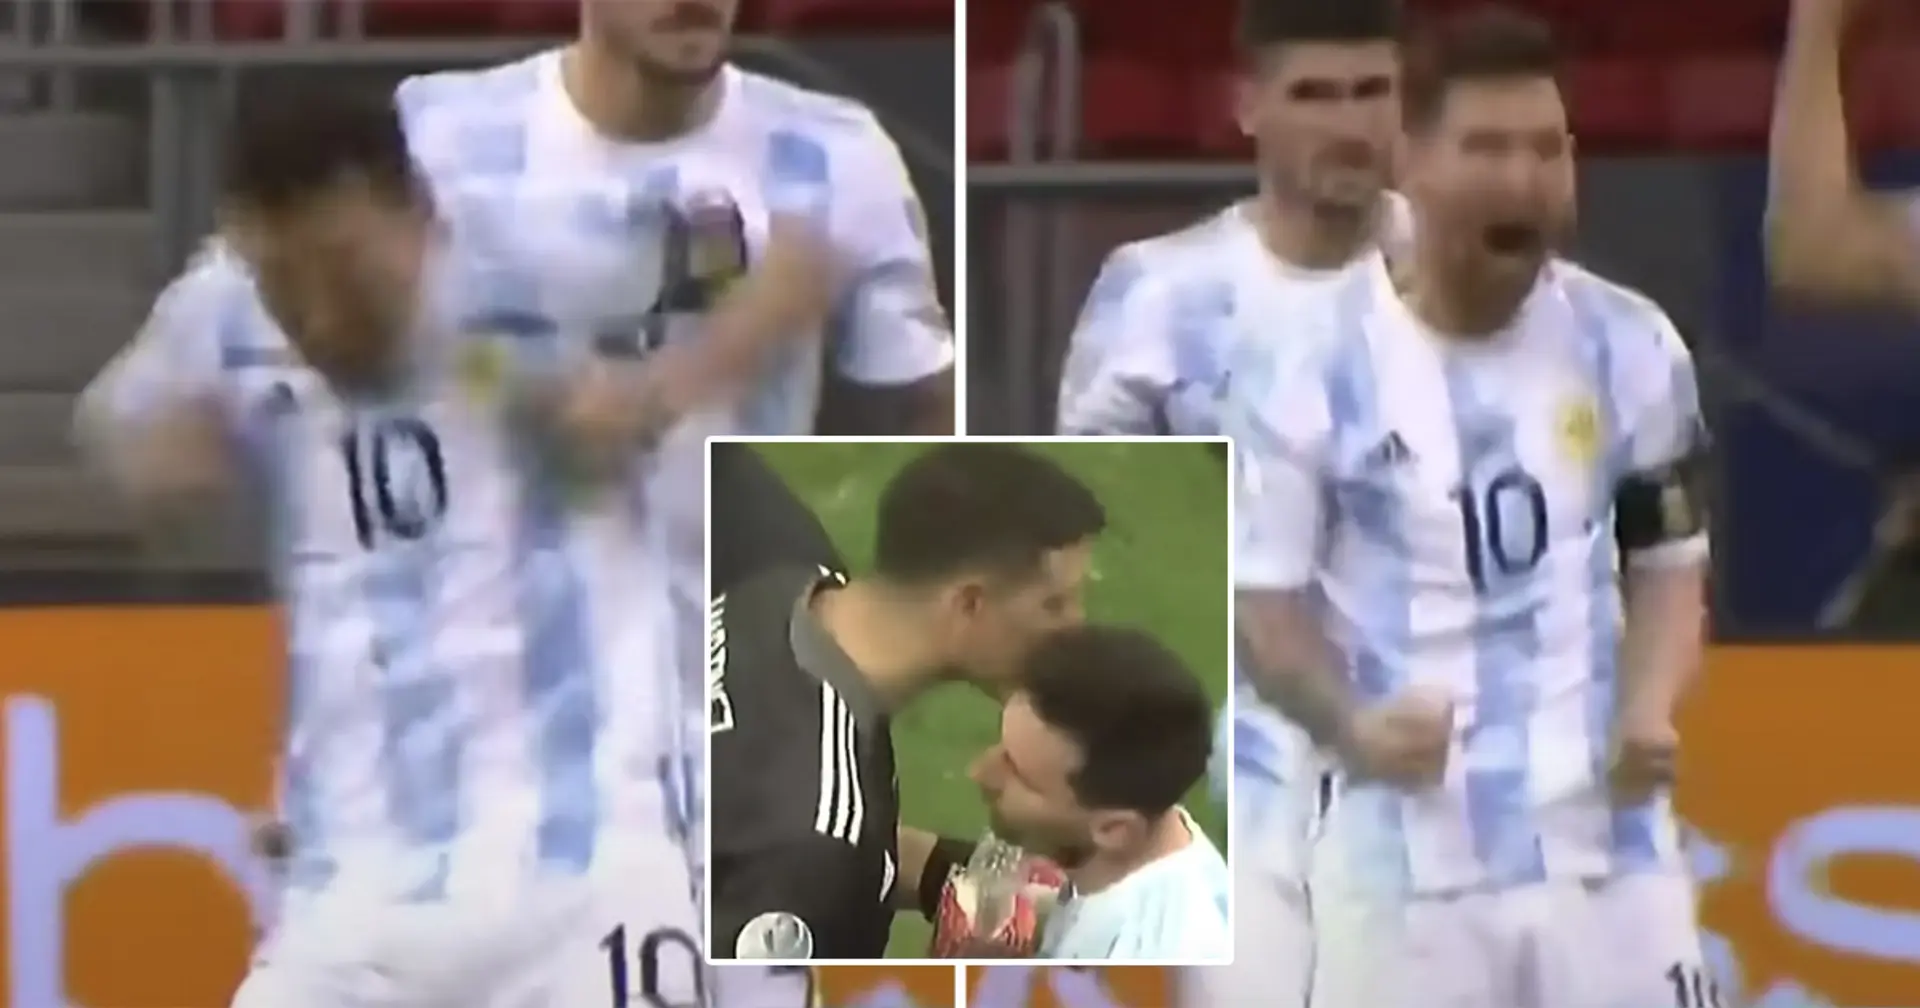 Shouts, smiles, frustration: Messi's emotions in epic Colombia clash caught on cameras